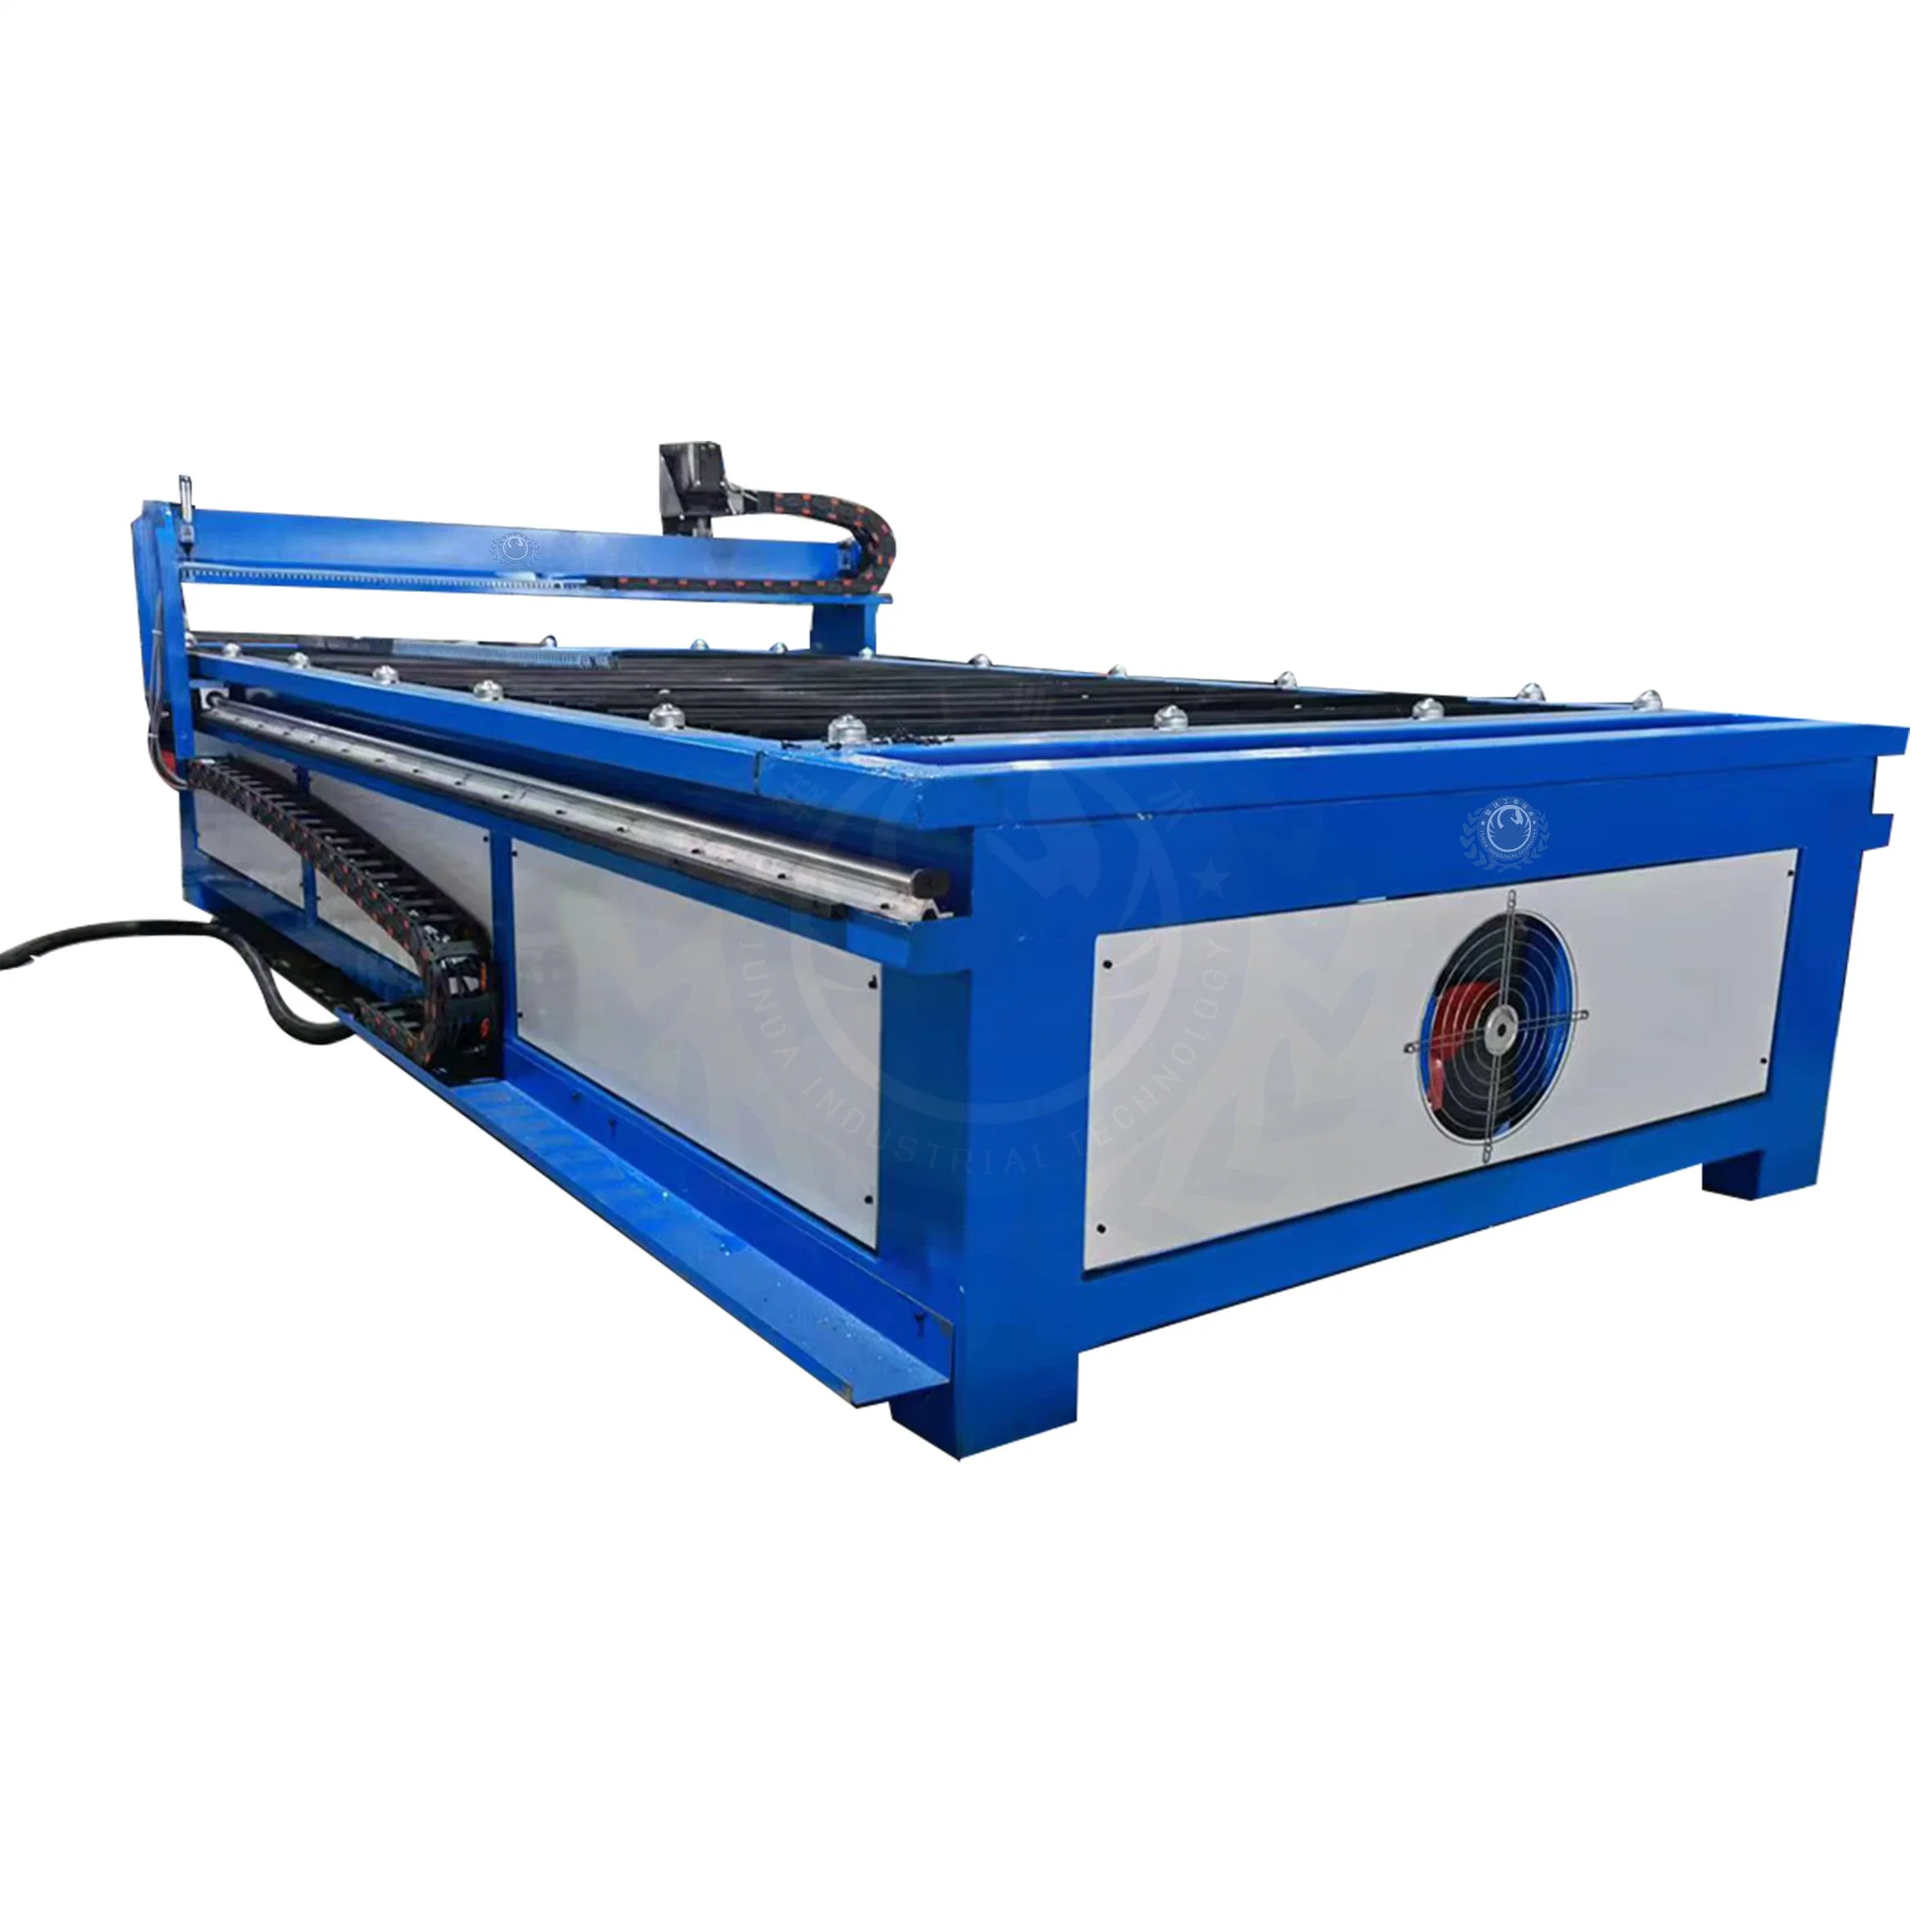 Discount Price China Metal CNC Plasma Cutting Machine for Sstainless Steel Carbon Steel Alloy Aluminum